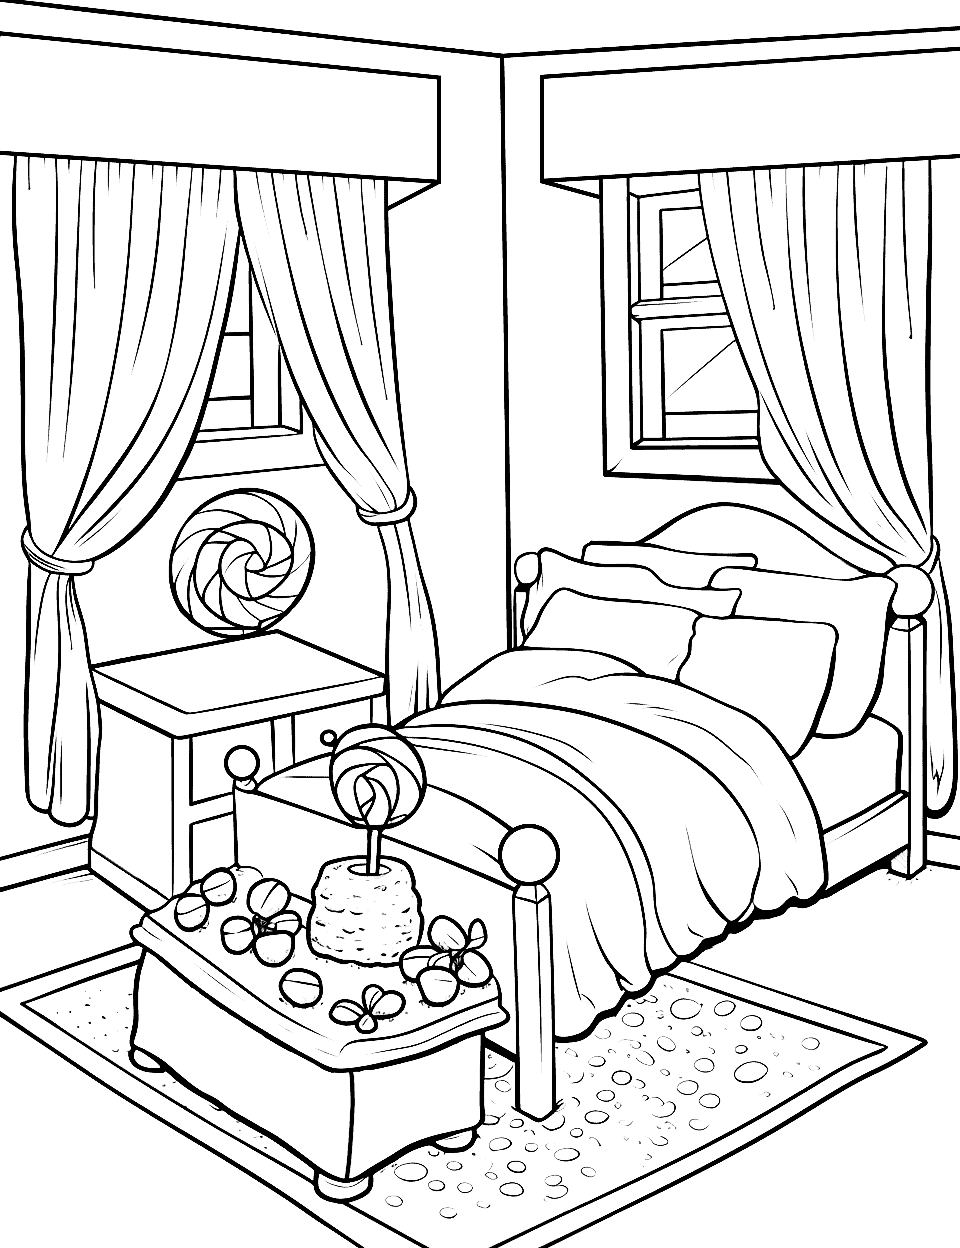 Sweet Dreams Bedroom Candy Coloring Page - A child’s bedroom with furniture and decorations themed around various sweets and candies.